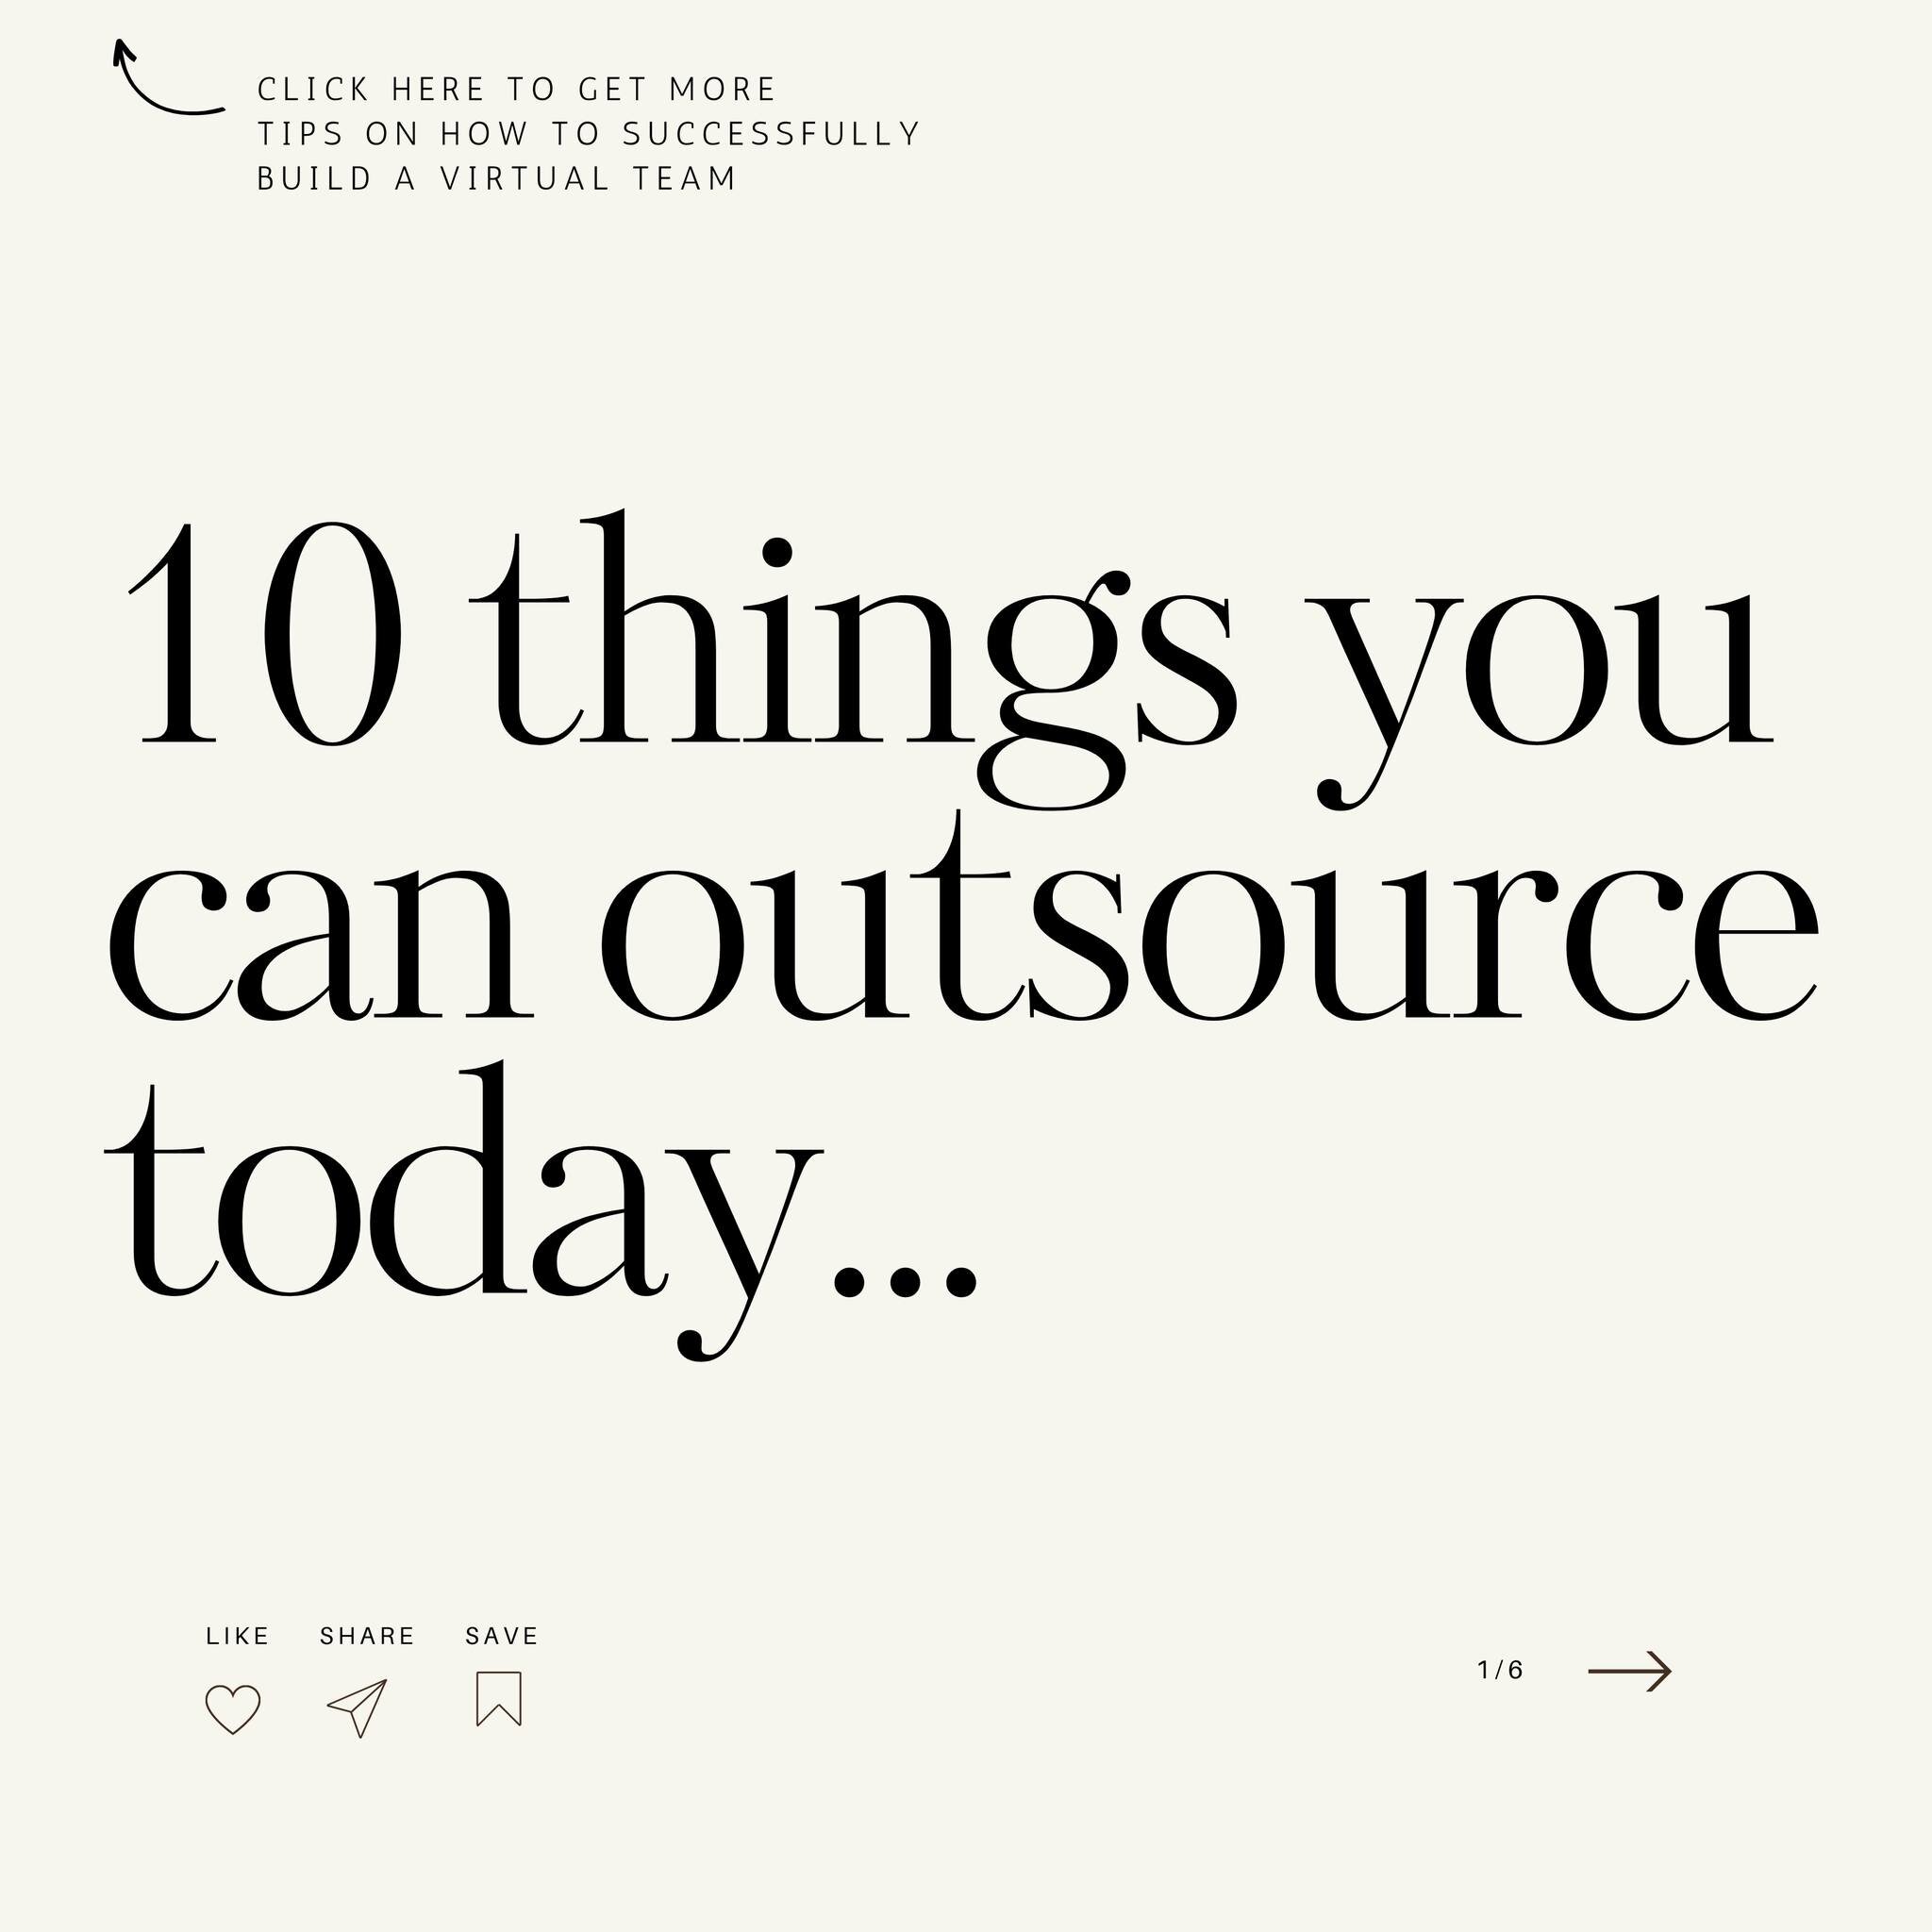 Here are 10 things you could outsource today 📥👇

1️⃣ Social Media Management: From scheduling posts, creating content to responding to comments.

2️⃣ Inbox and Calendar Management: Filing, flagging and responding to emails and customer enquiries.

